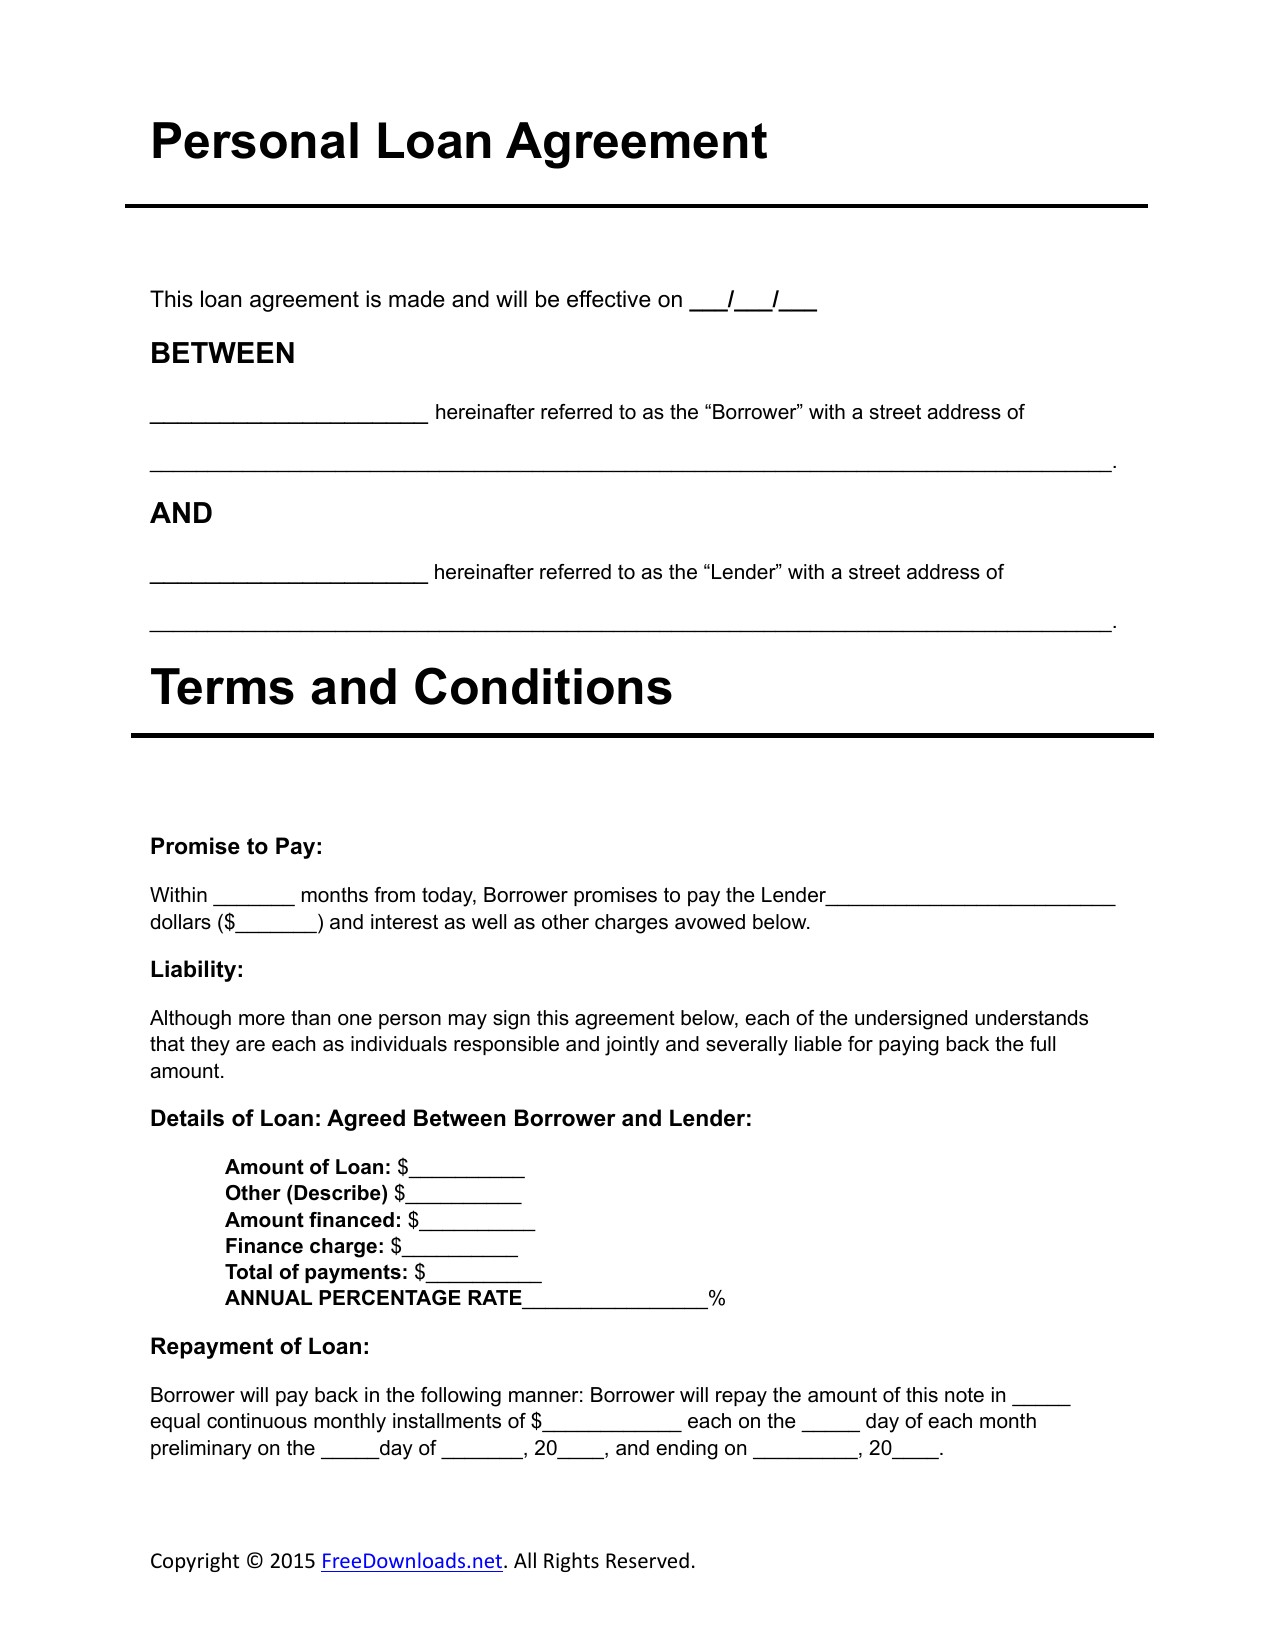 Download Personal Loan Agreement Template PDF RTF Word Document Private